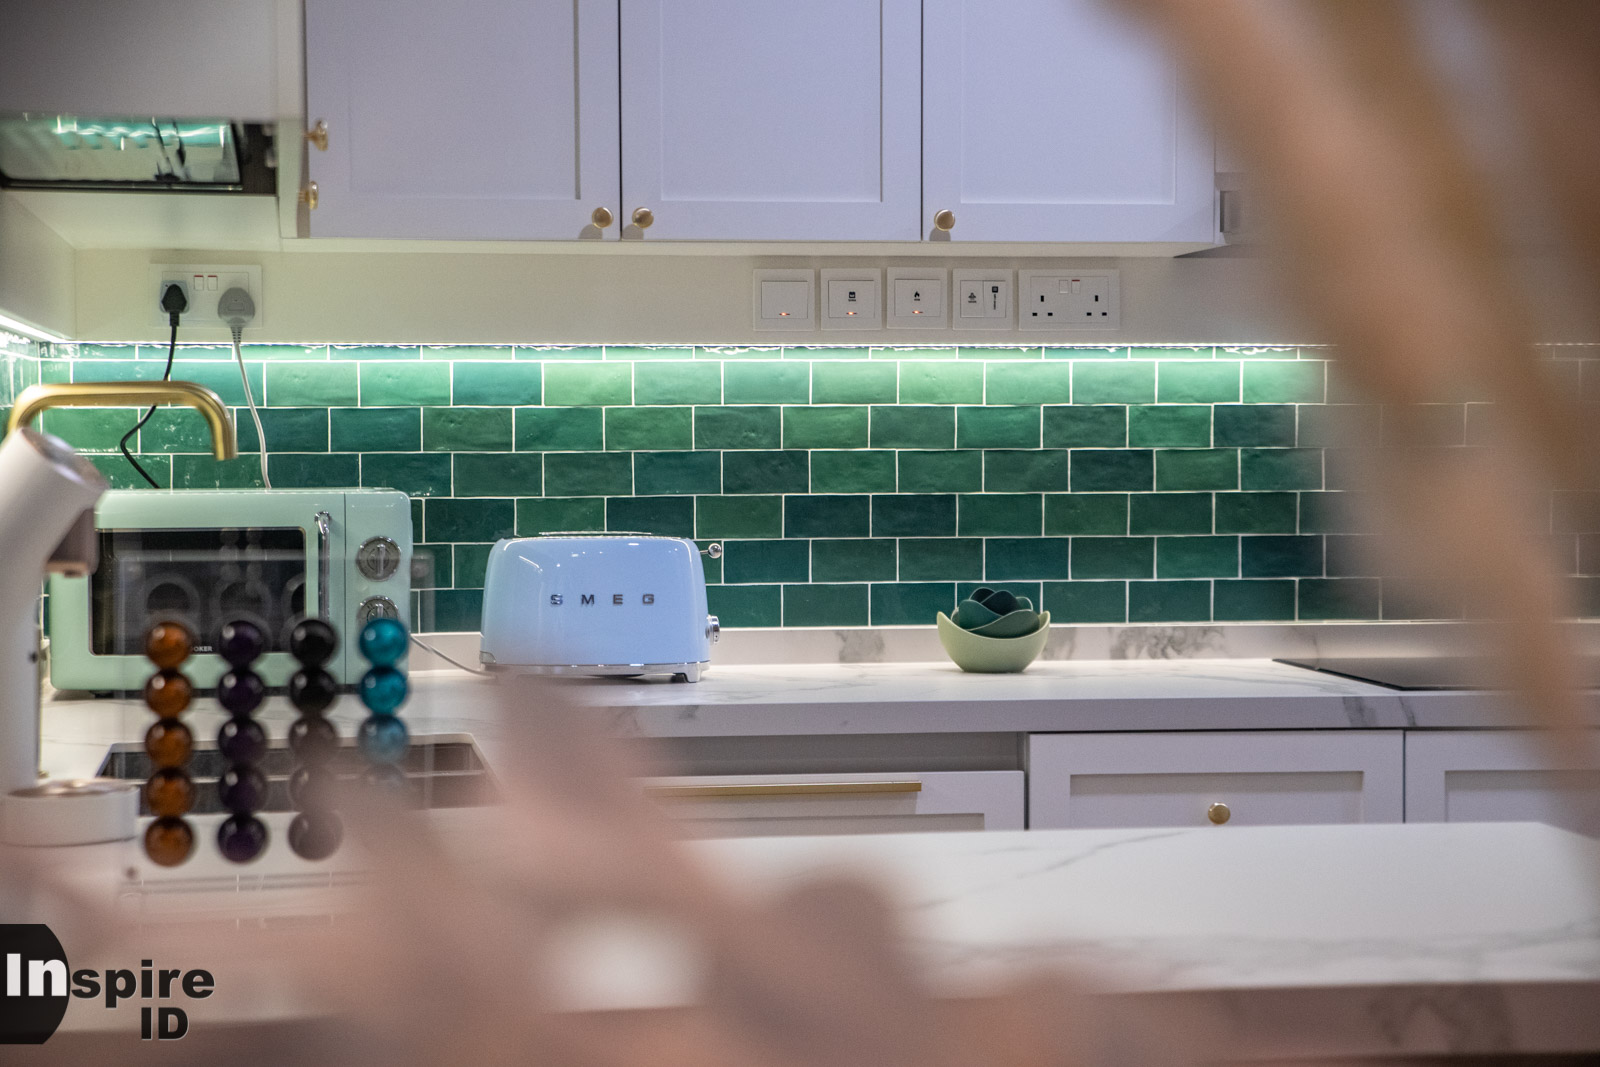 Gorgeous Jade-Like Tiled Wall in Kitchen